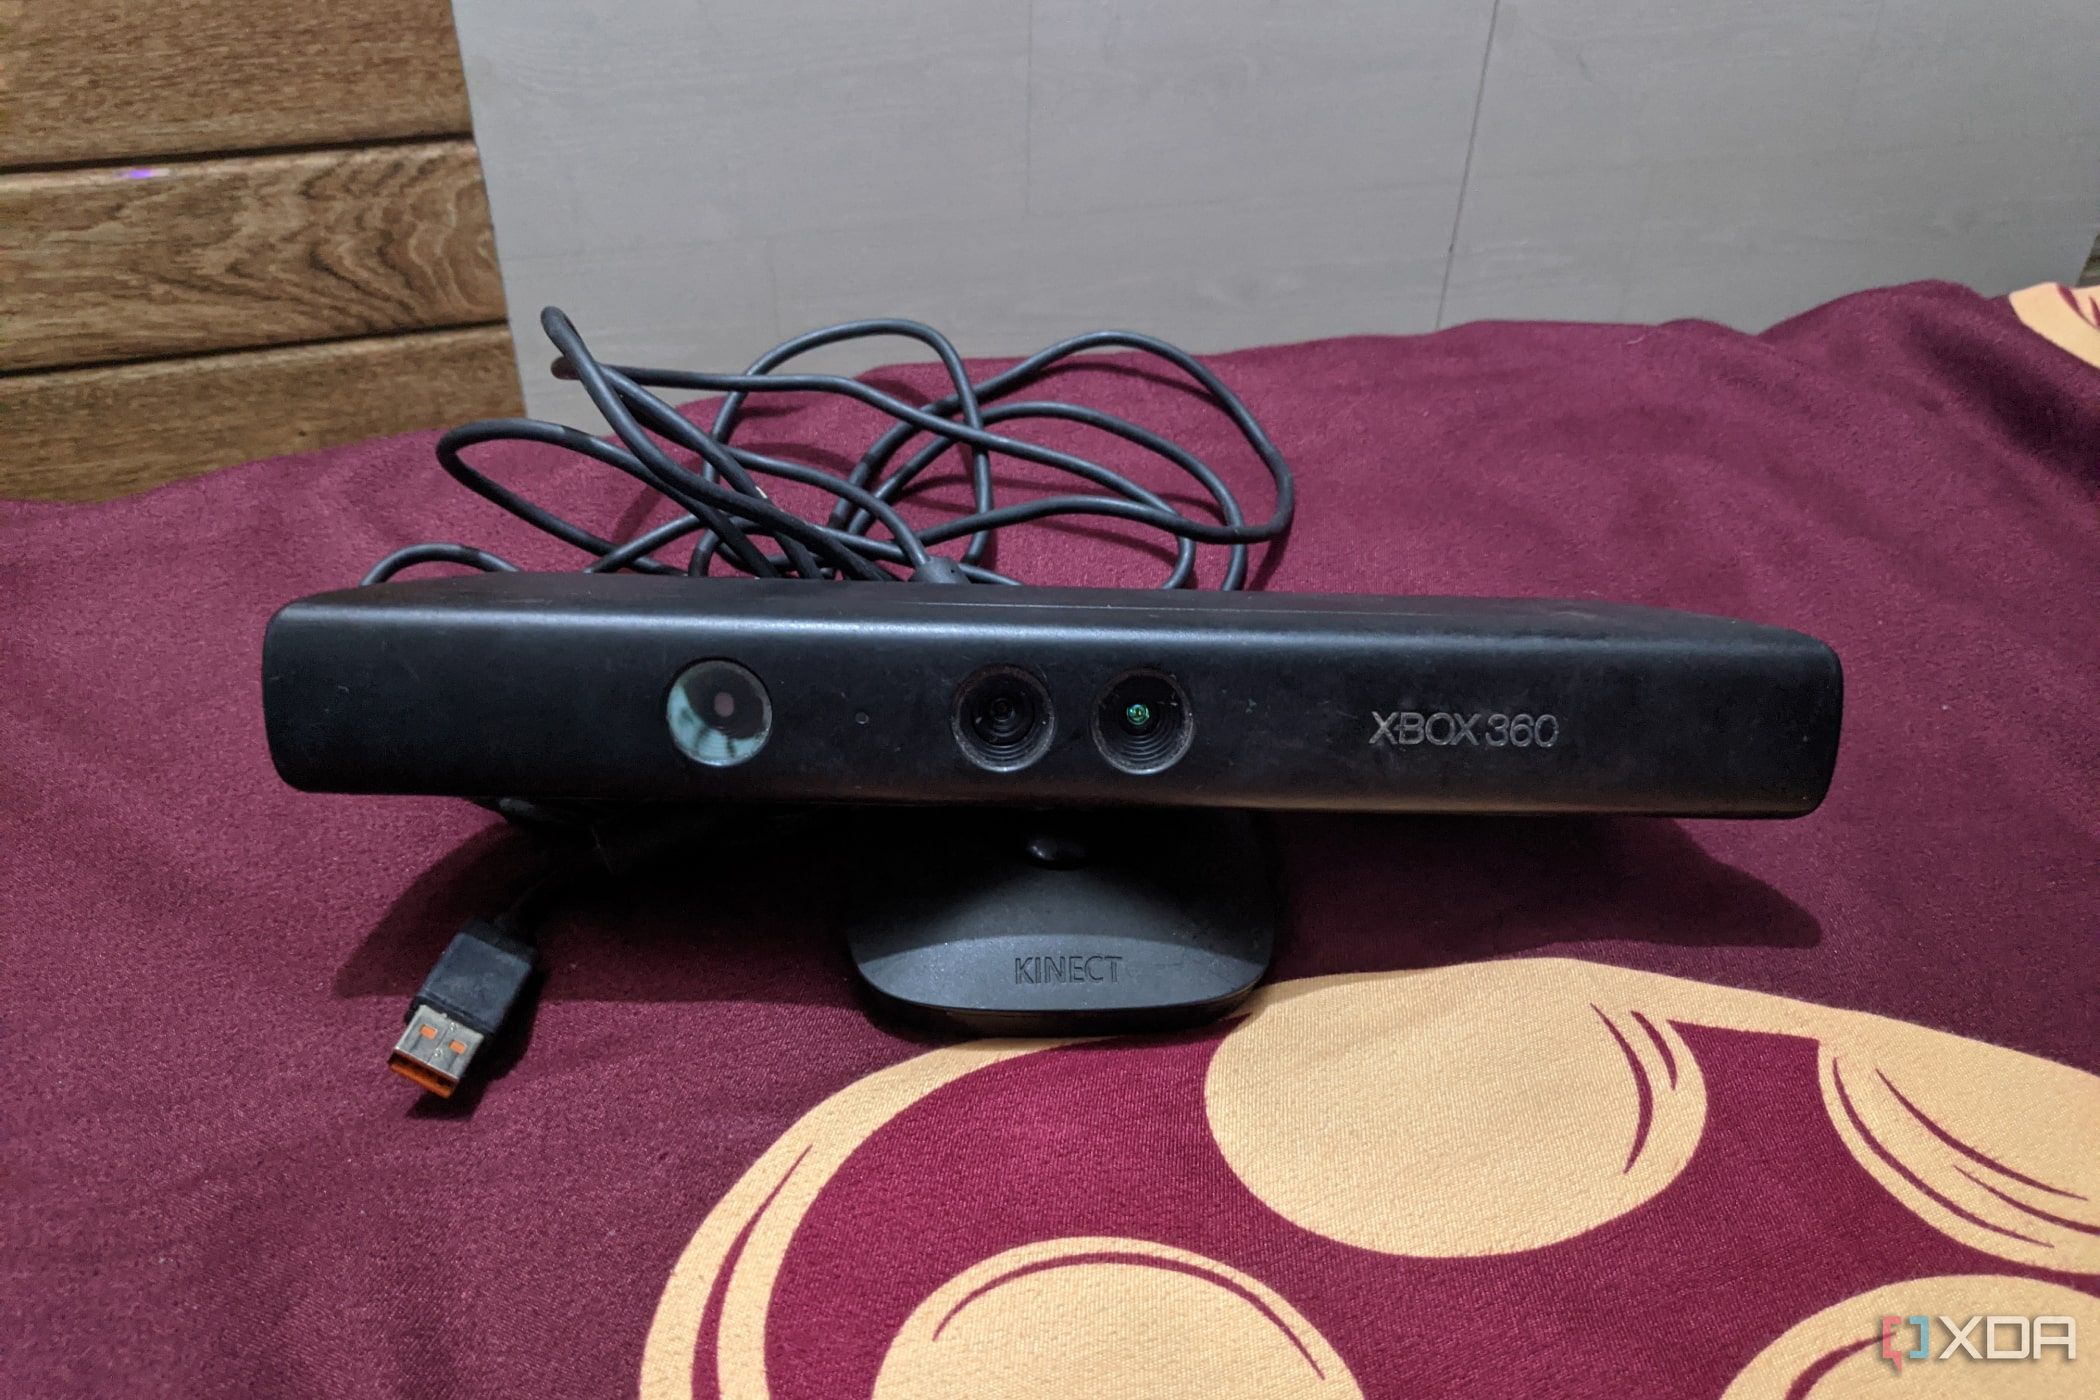 The slow and painful death of Xbox Kinect